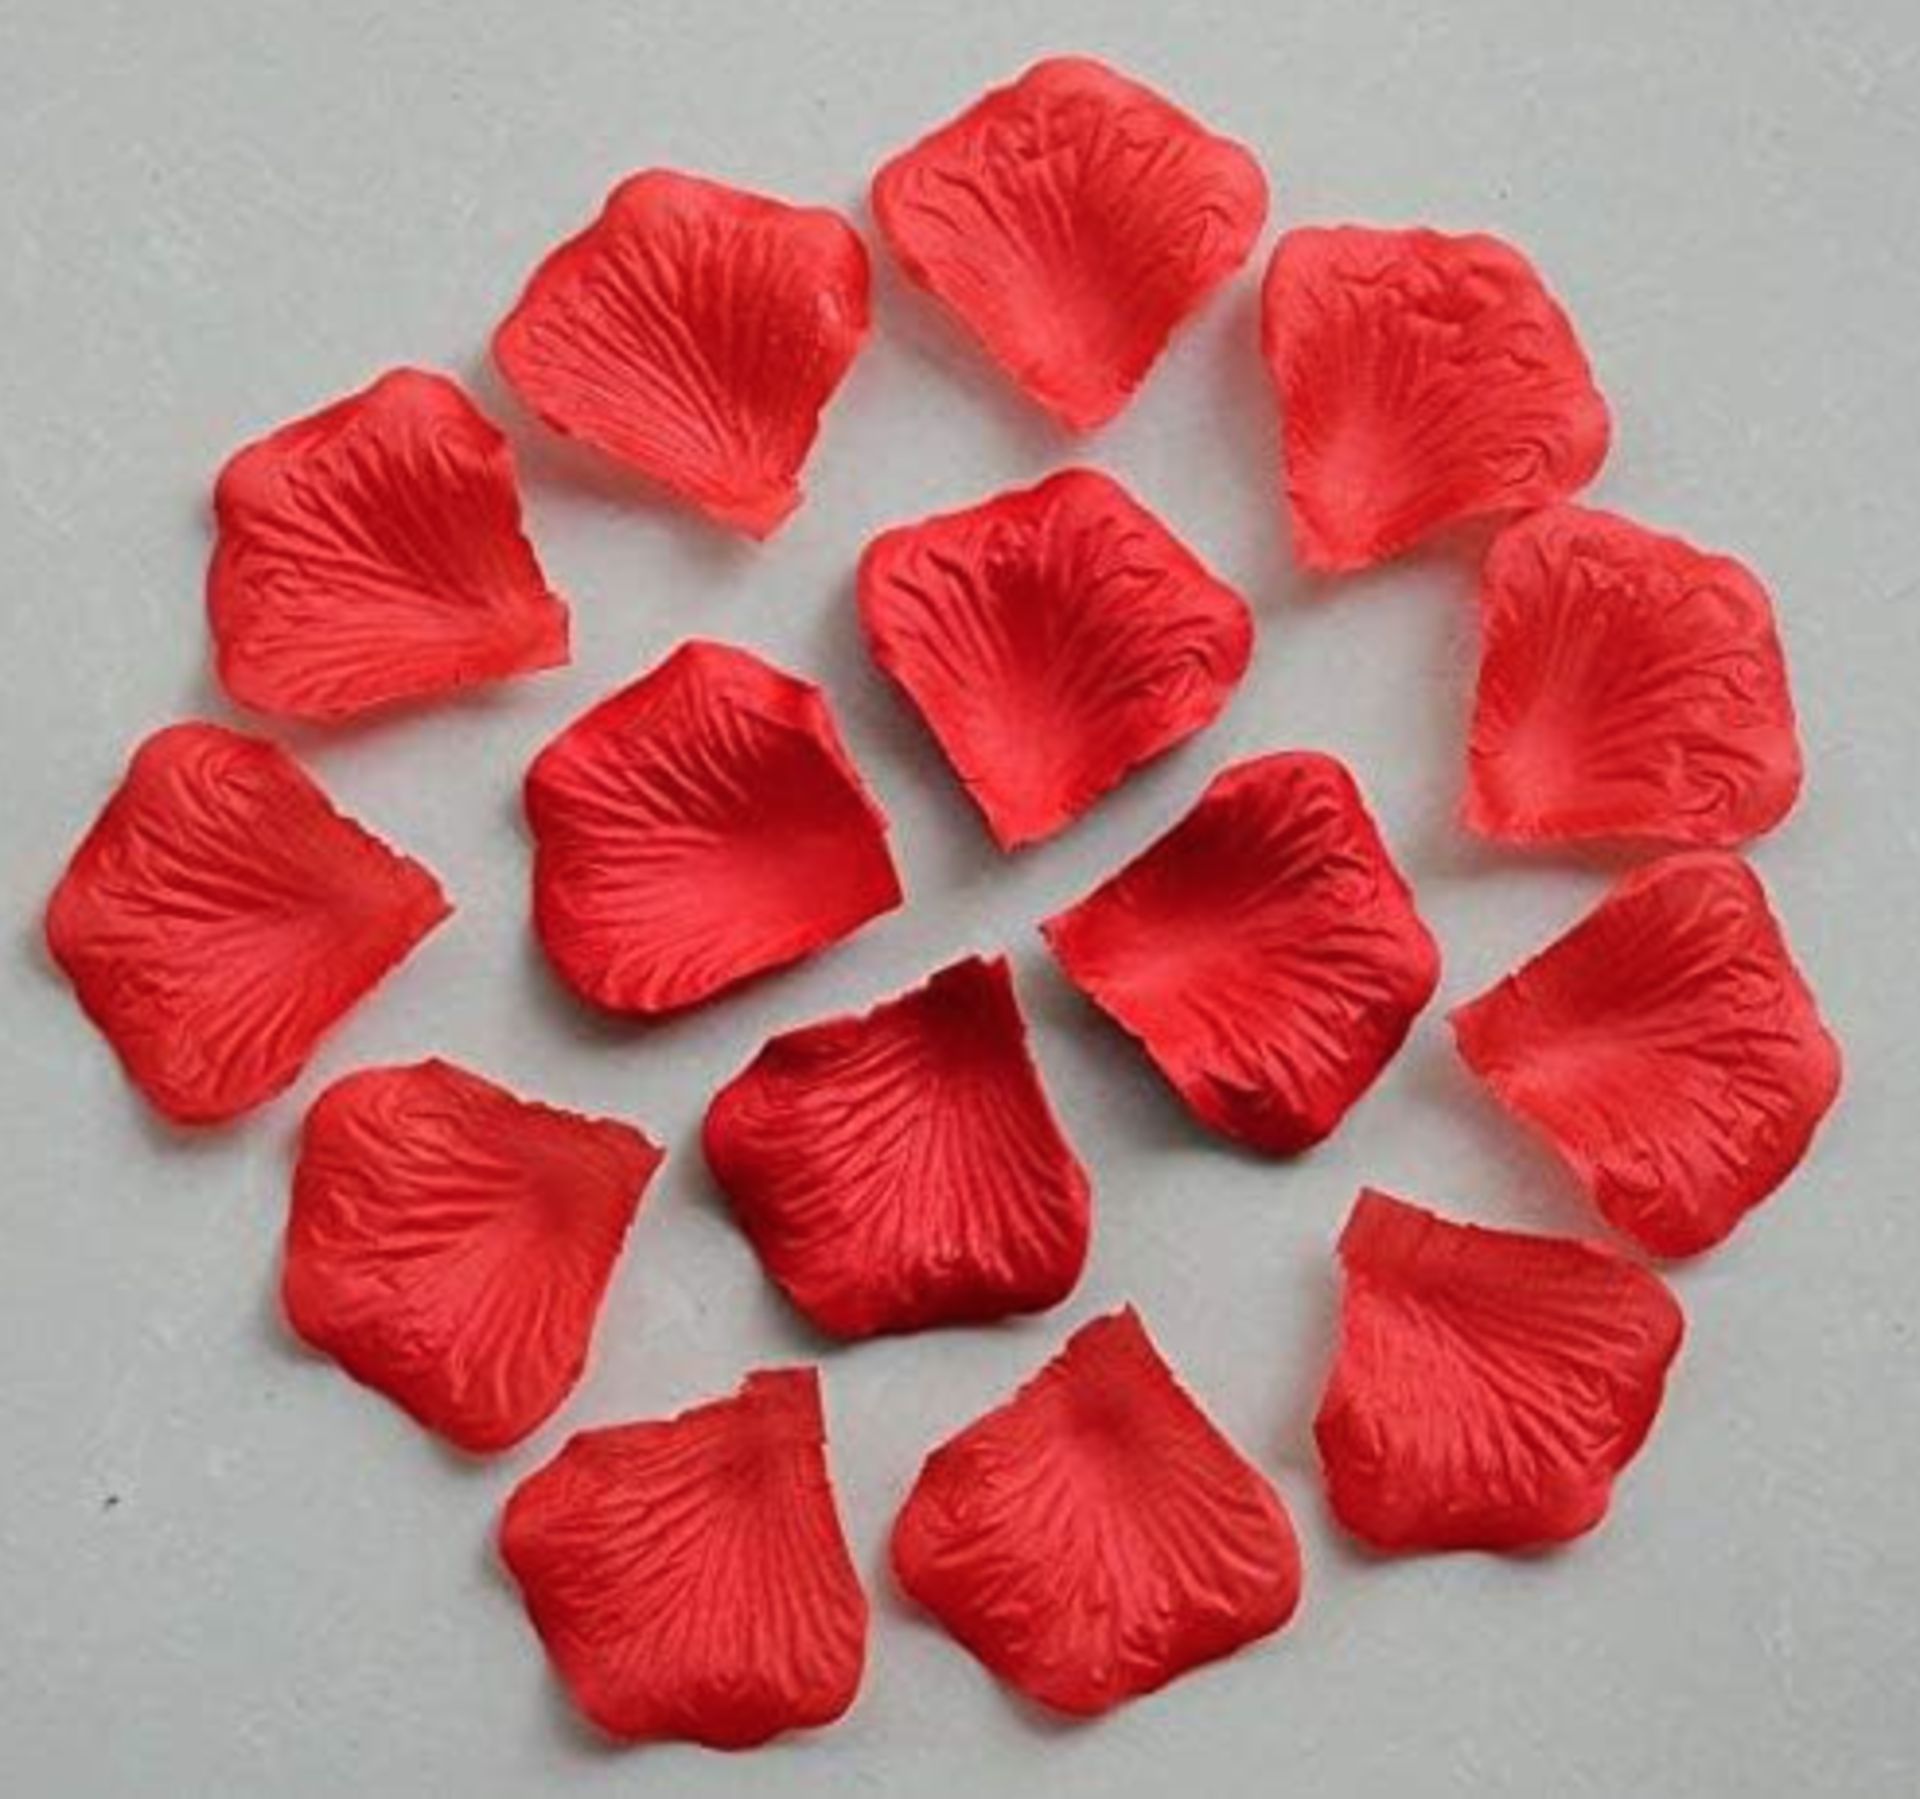 100pcs Deep Red Silk Rose Petals Valentines Day Wedding Confetti RRP£3 - Image 3 of 3